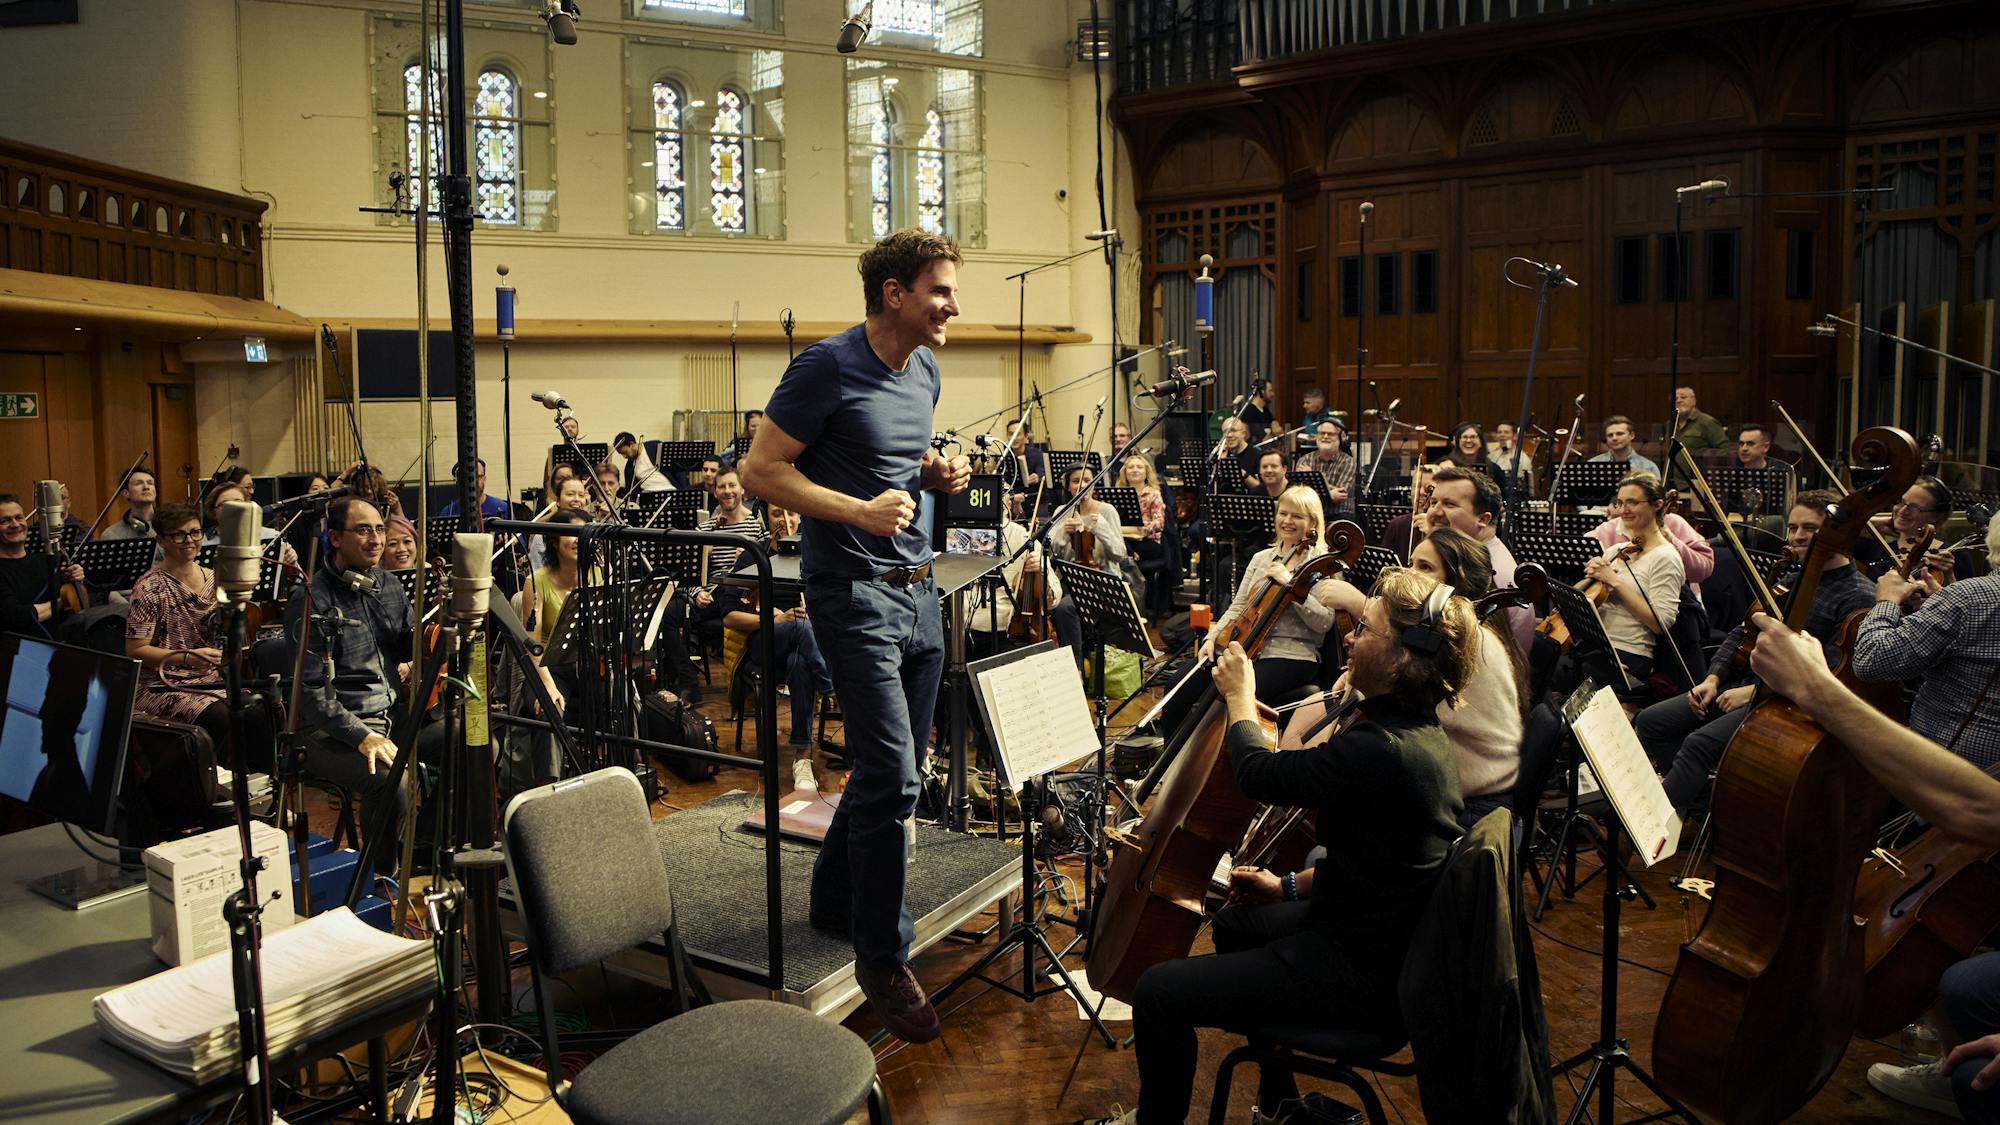 Bradley Cooper, behind the scenes, wears jeans and a blue shirt as he conducts a huge orchestra.